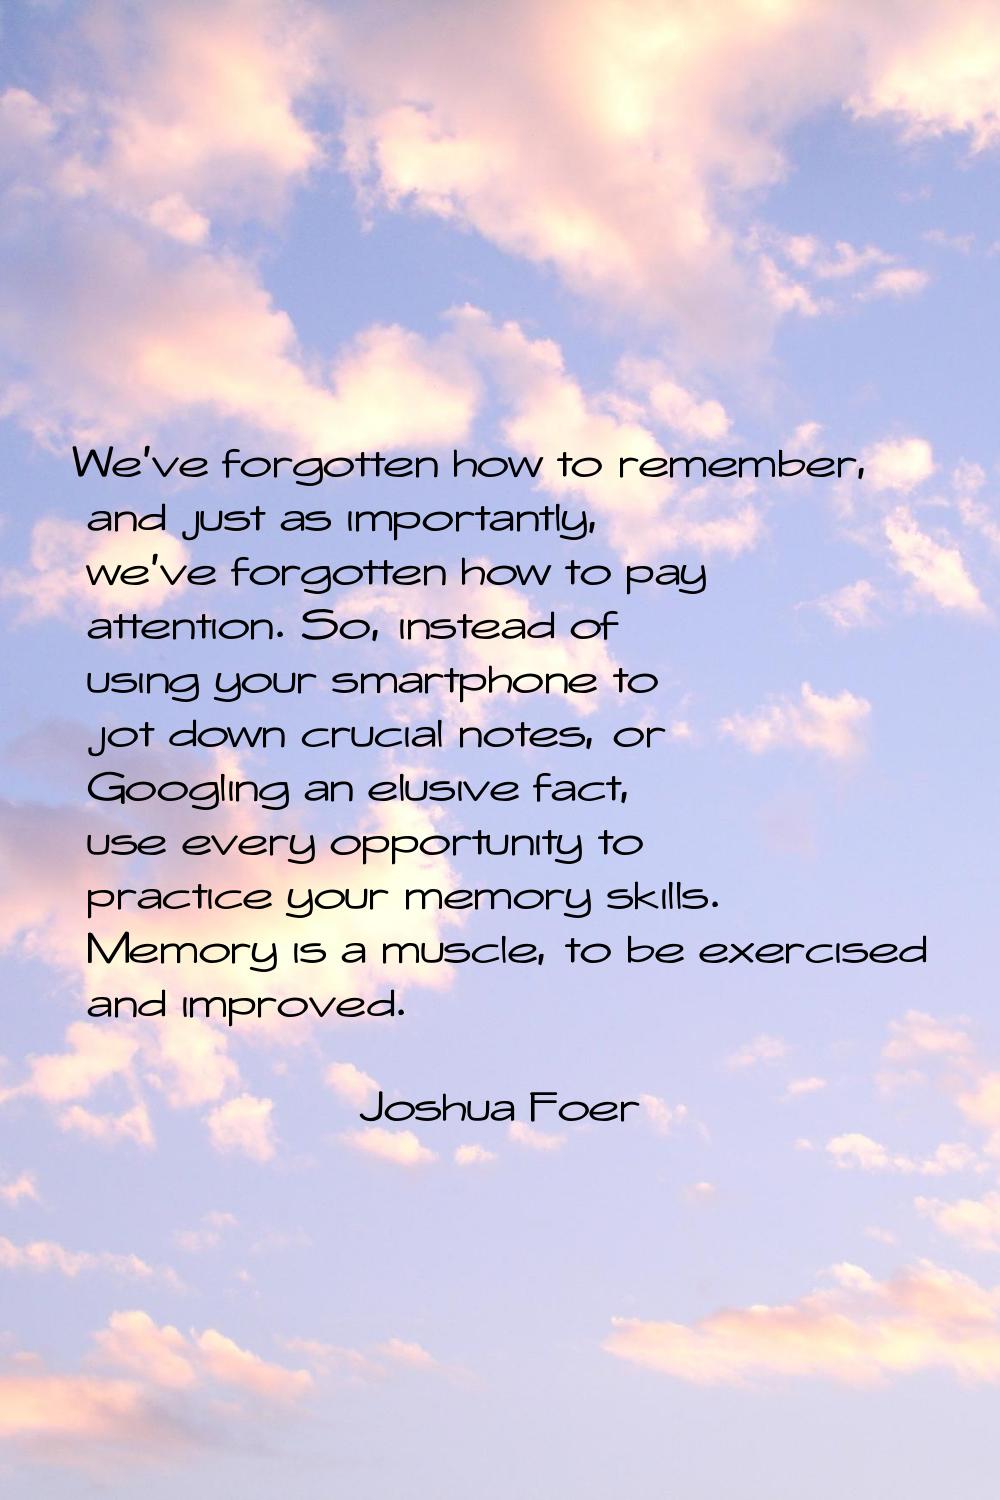 We've forgotten how to remember, and just as importantly, we've forgotten how to pay attention. So,